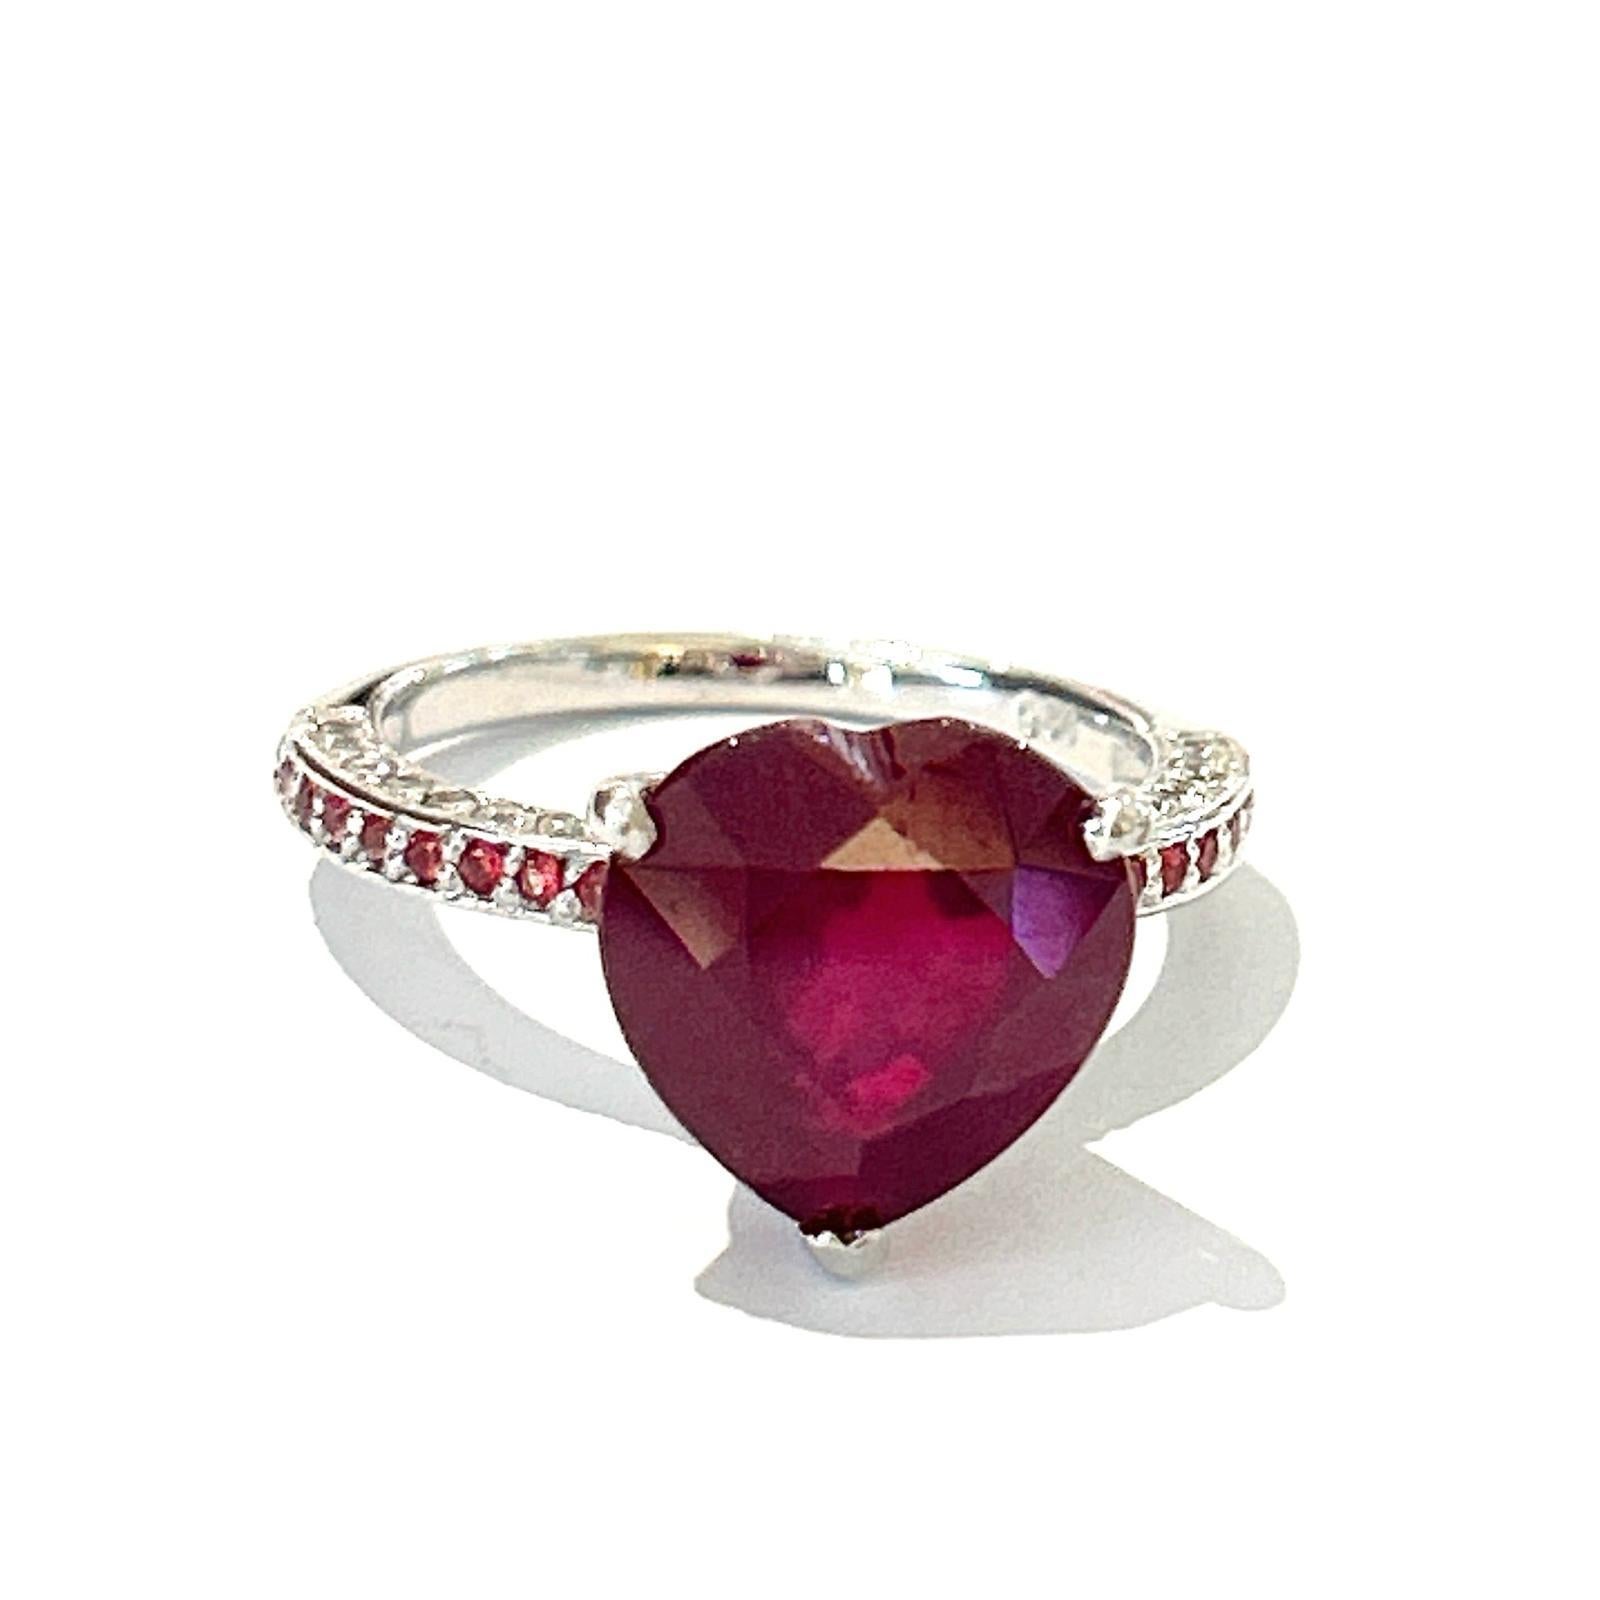 Anglo-Indian Bochic “Orient” Diamond & Ruby Vintage Cocktail Ring Set In 18K & Silver  For Sale